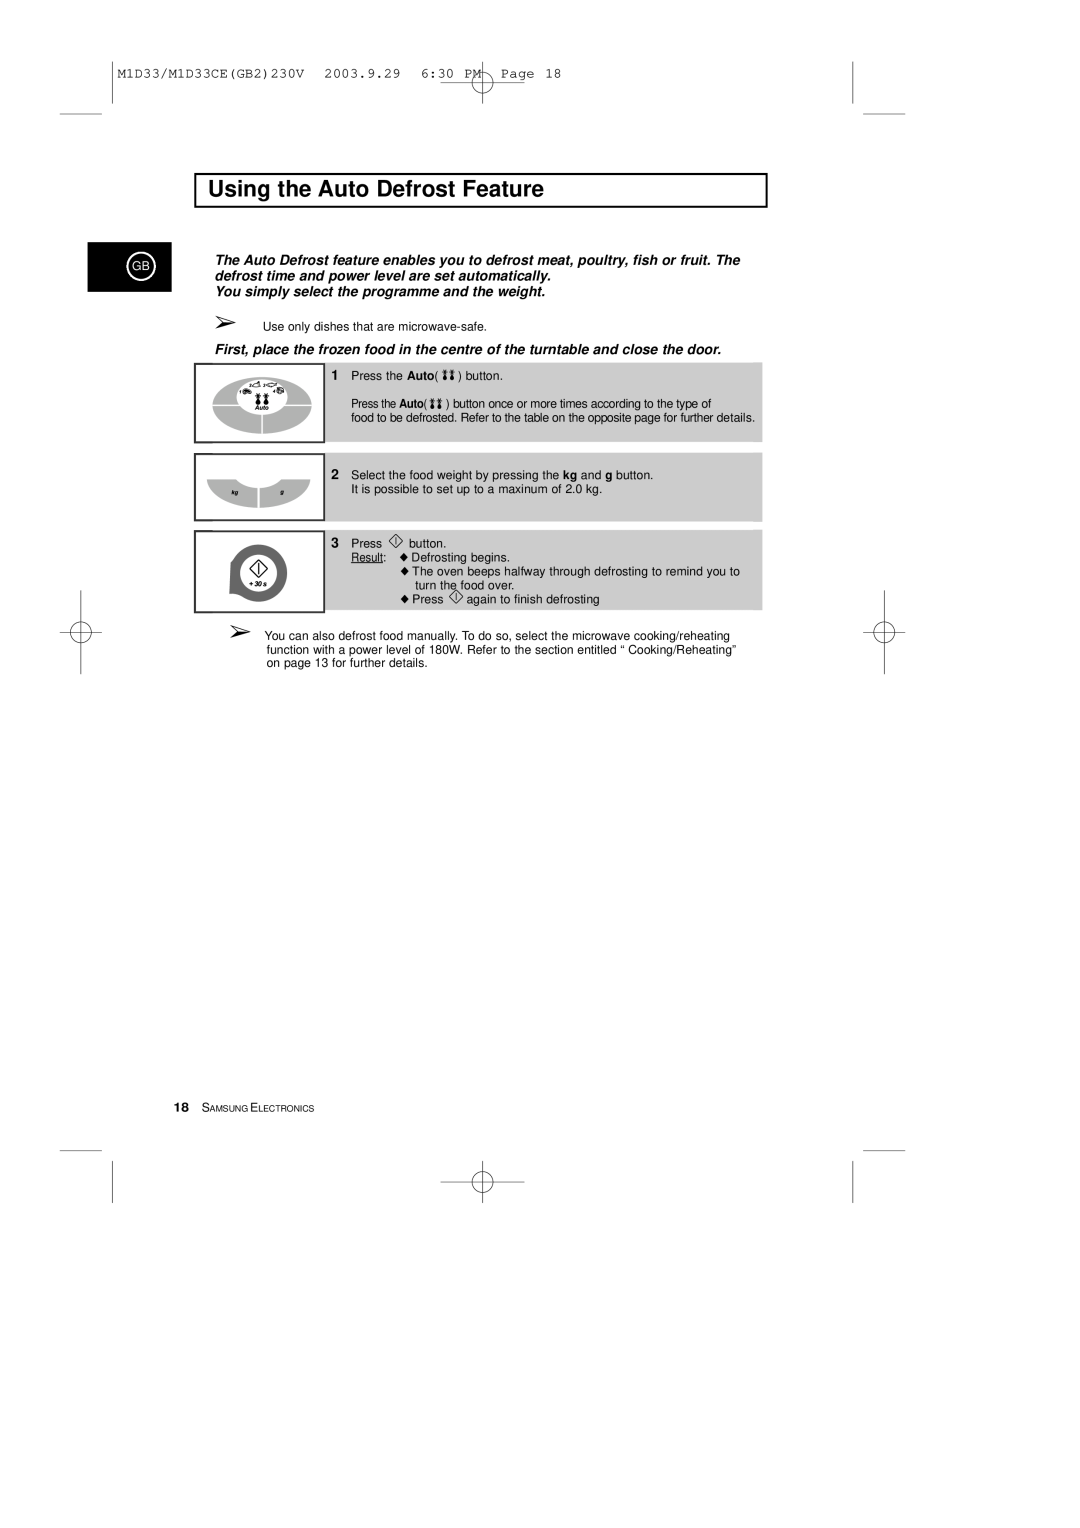 Samsung manual Using the Auto Defrost Feature, M1D33/M1D33CEGB2230V 2003.9.29 630 PM Page 